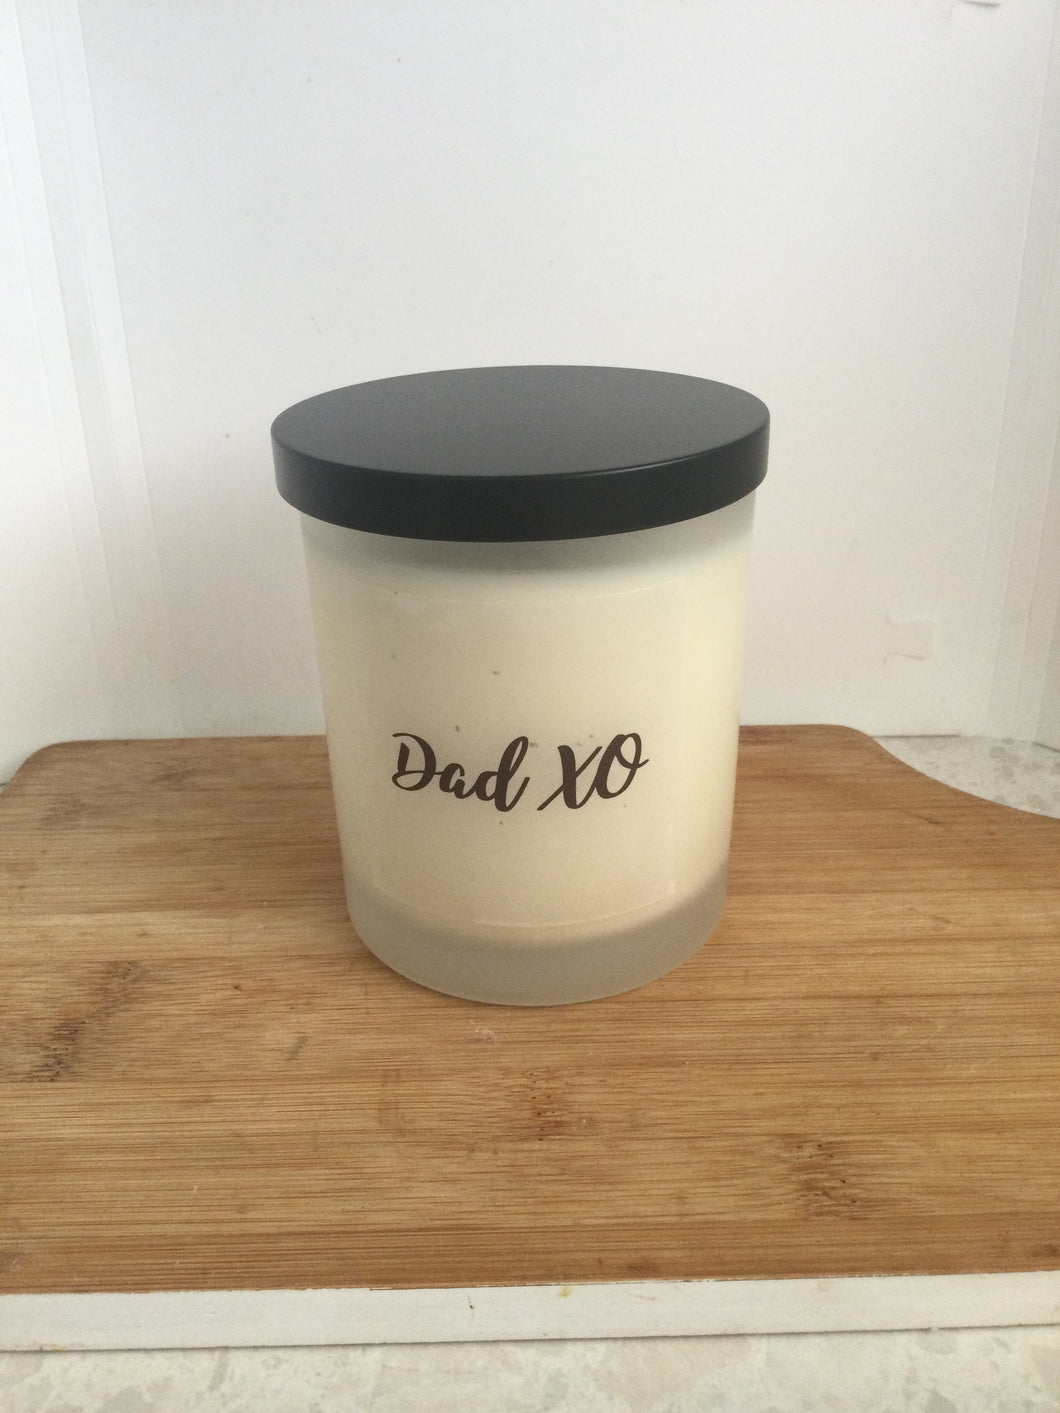 Father’s Day candles